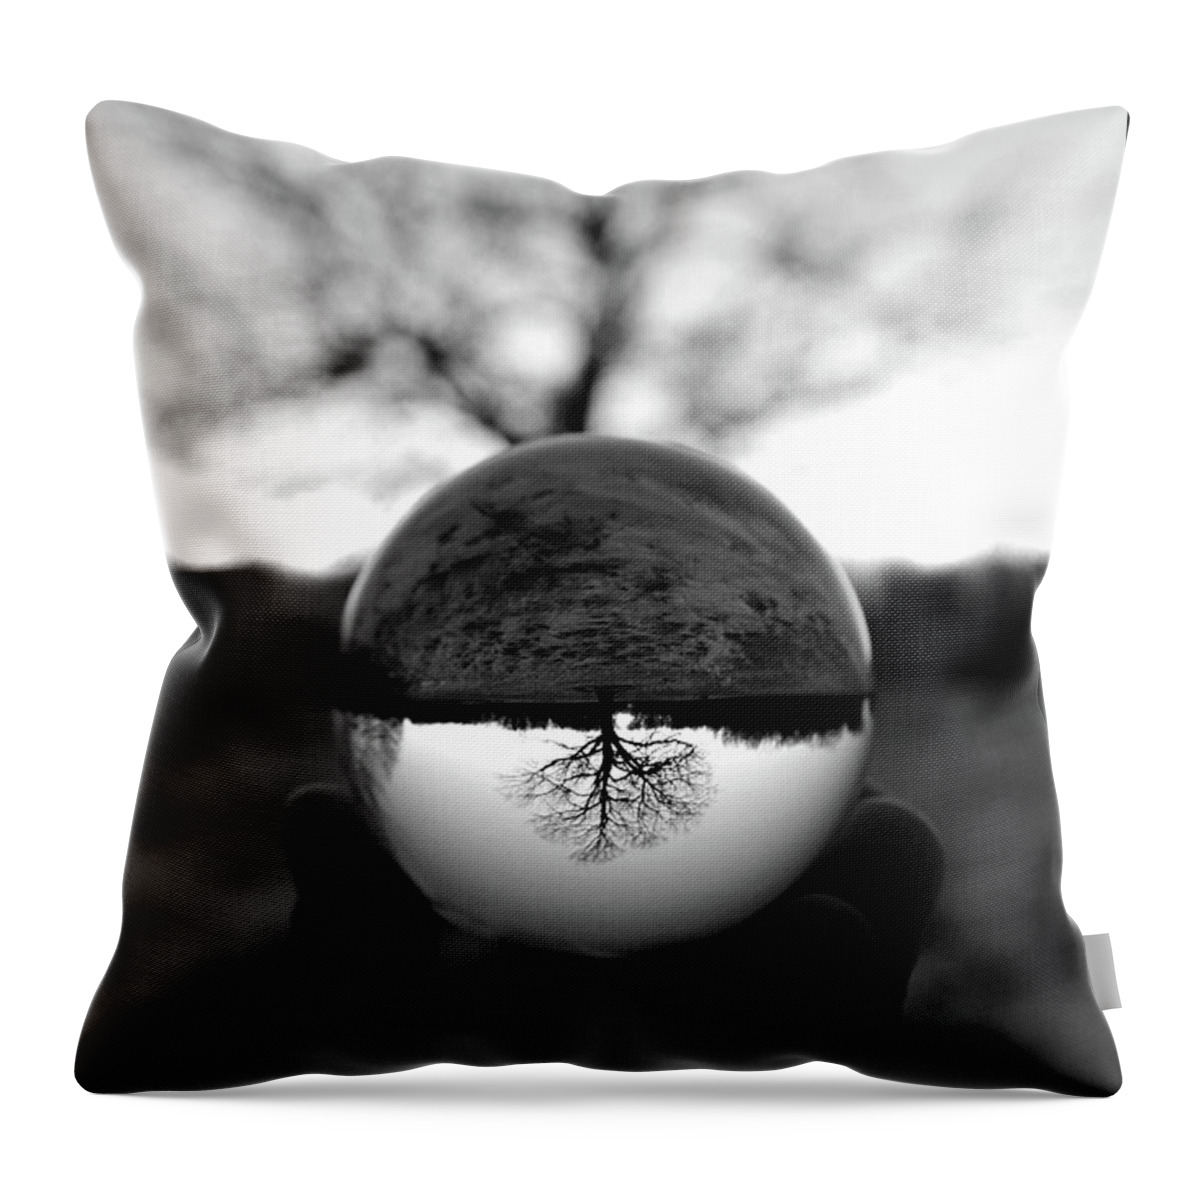 Bare Tree Throw Pillow featuring the photograph Lone Tree Lensball B W by David T Wilkinson